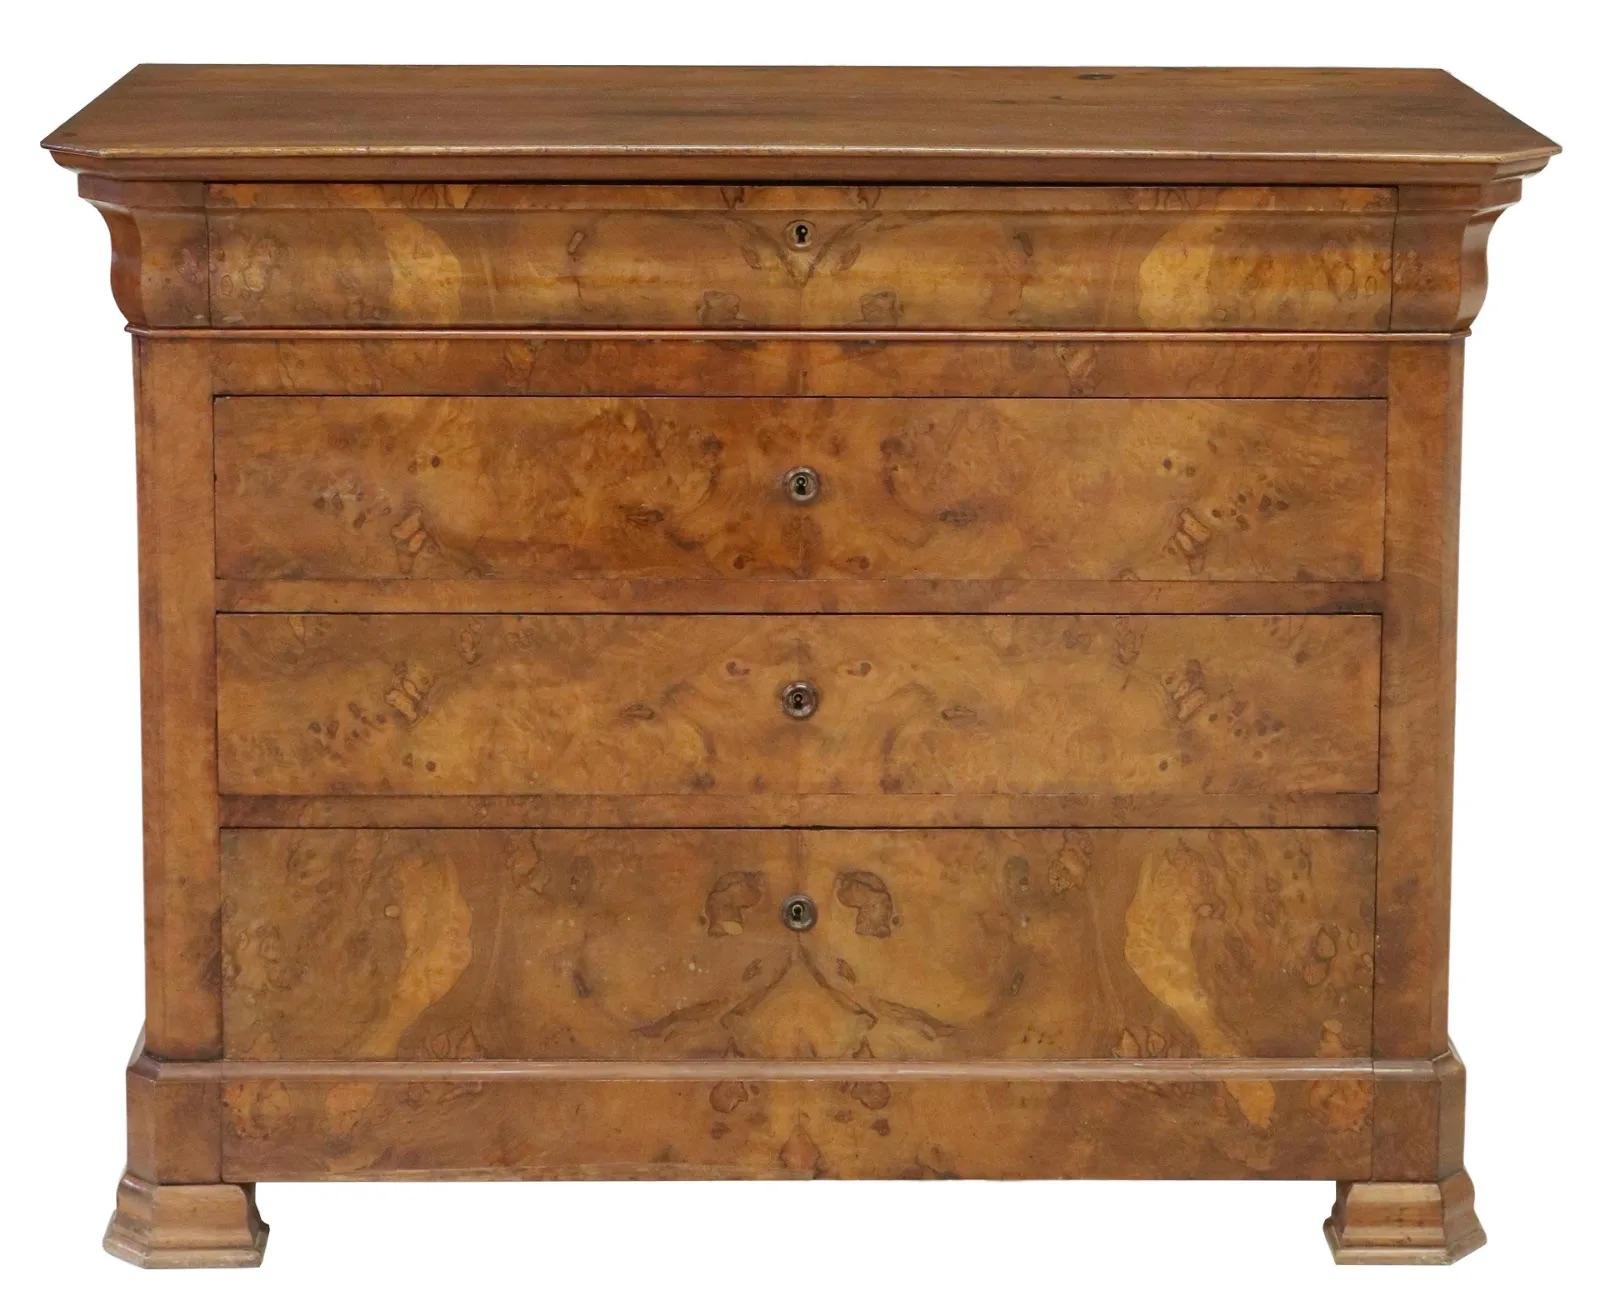 French Louis Philippe period walnut commode, mid 19th c., ogee frieze drawer, over three additional drawers, rising on bracket feet. Beautiful flamed walnut veneer. Singe drawer key included.

Dimensions: approx 39